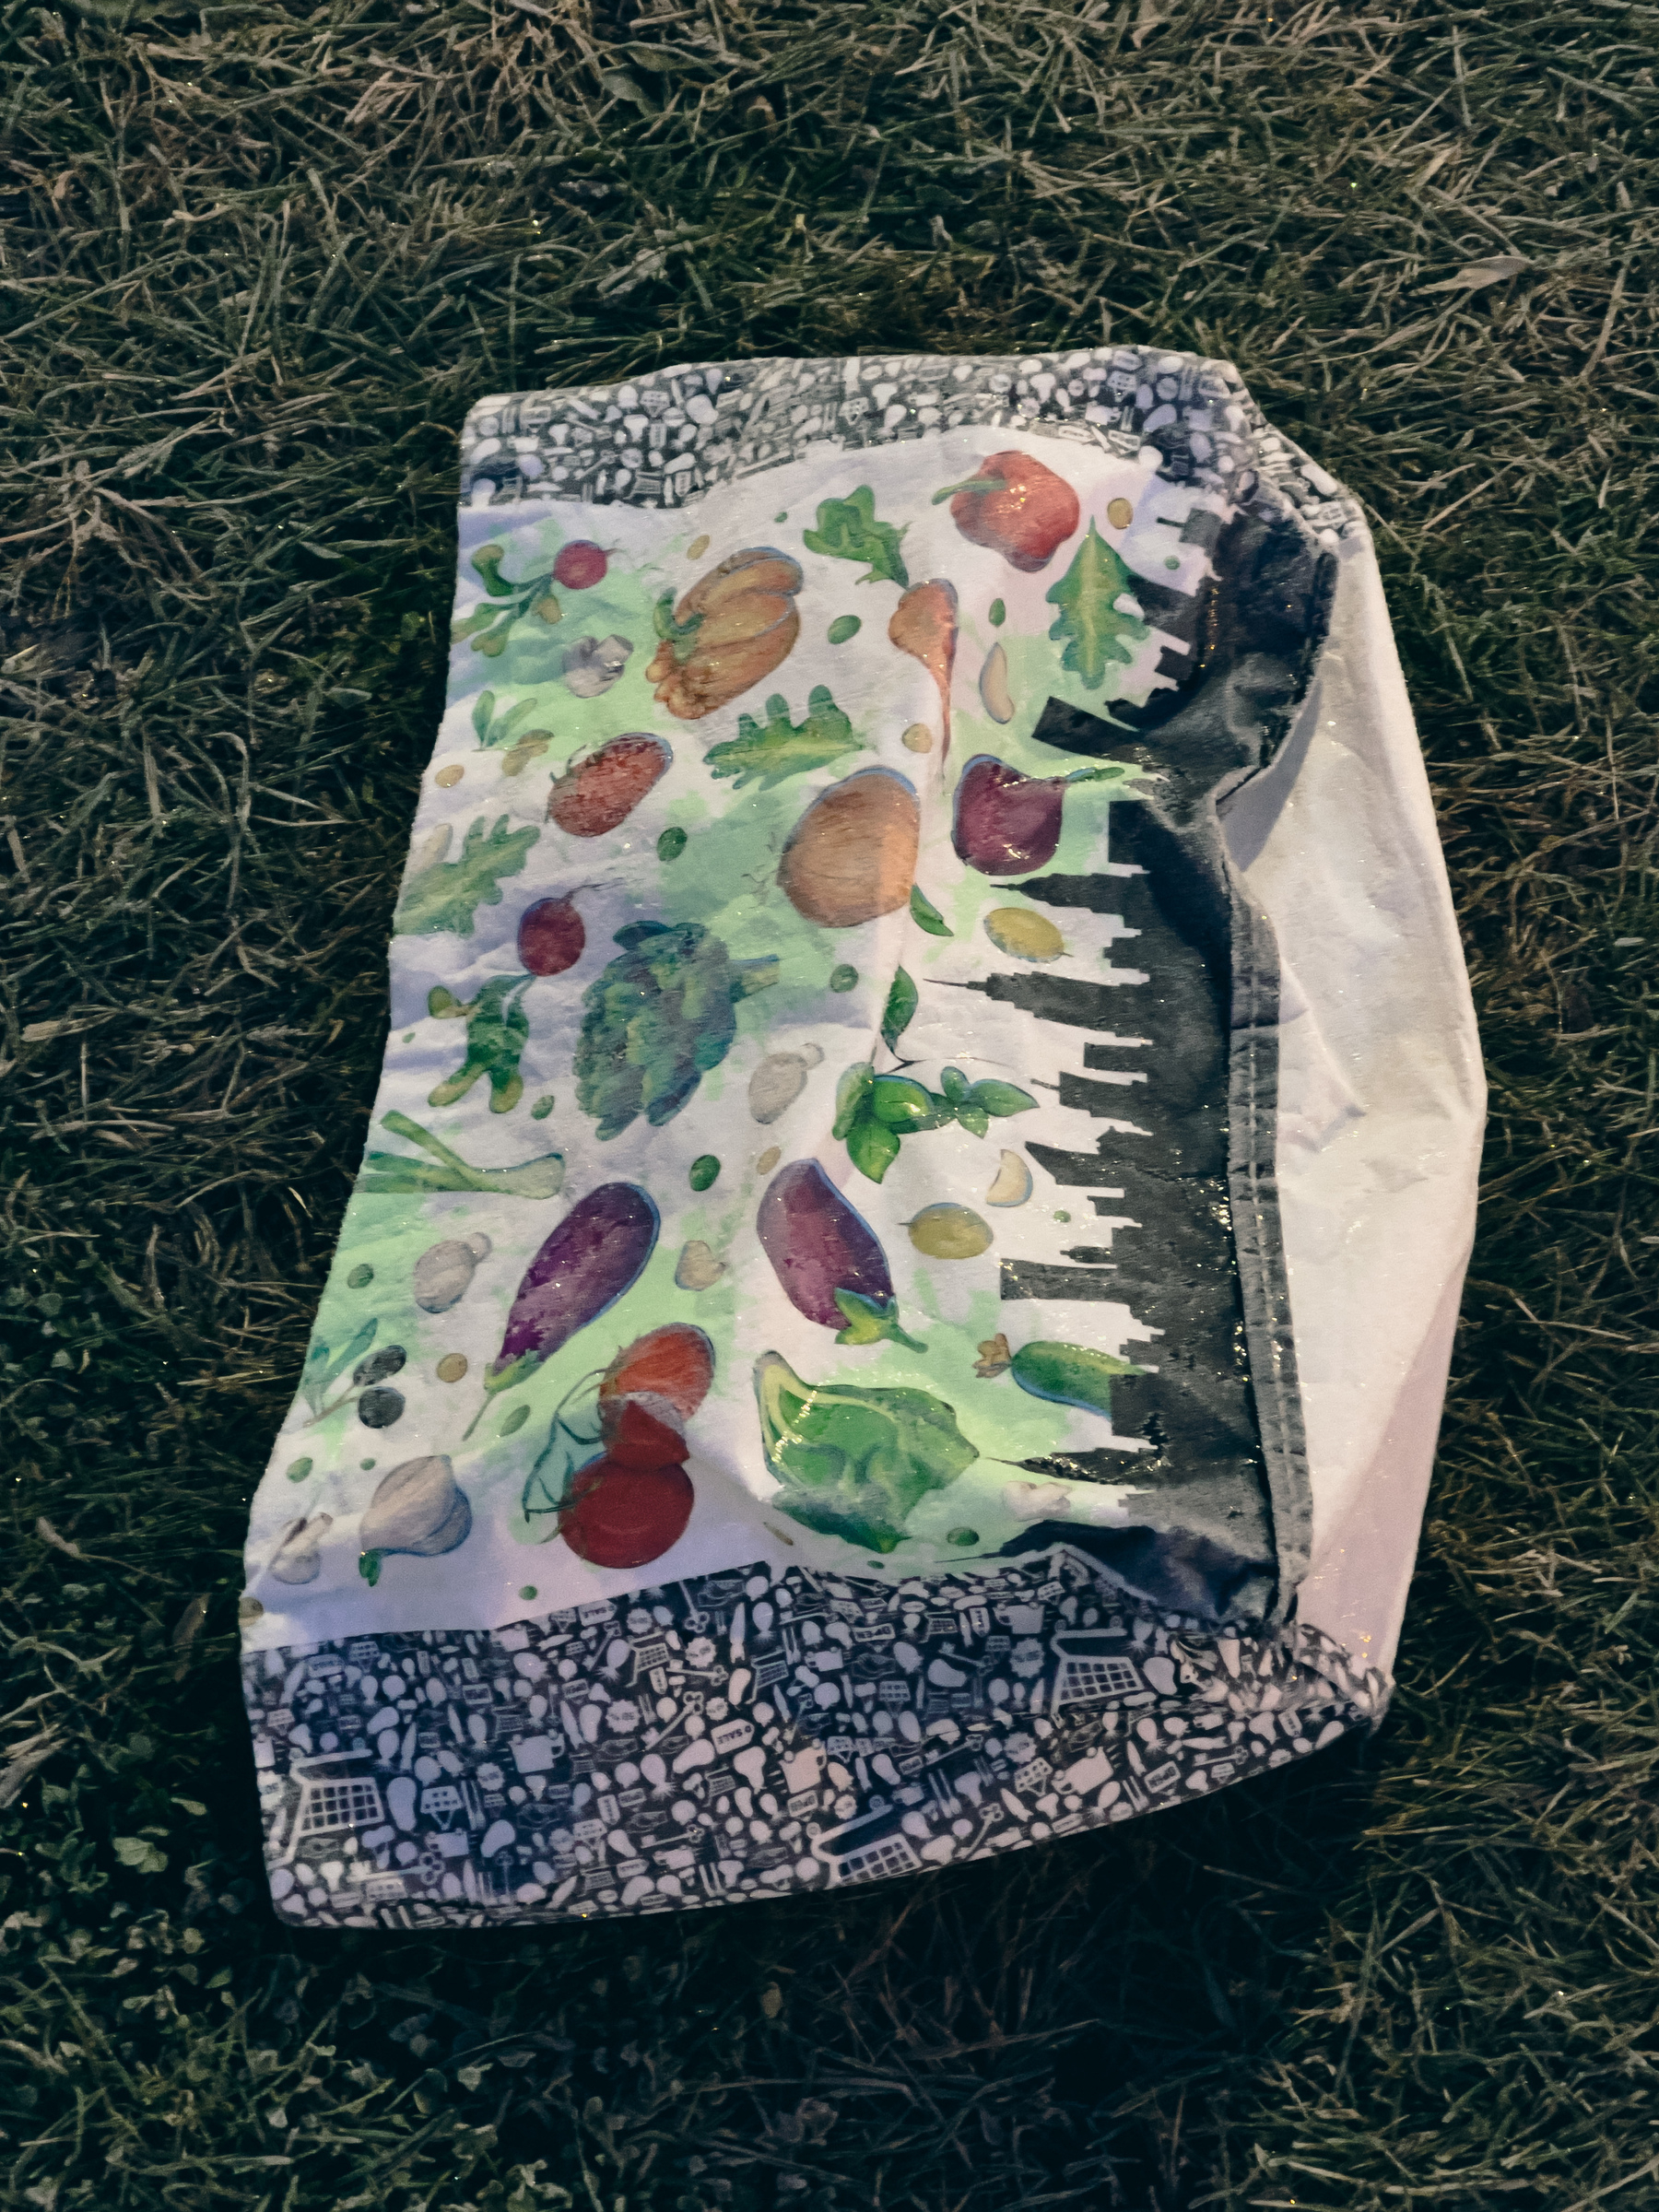 Colorful shopping bag with vegetables and leaves print and city skyline print on frost covered grass.